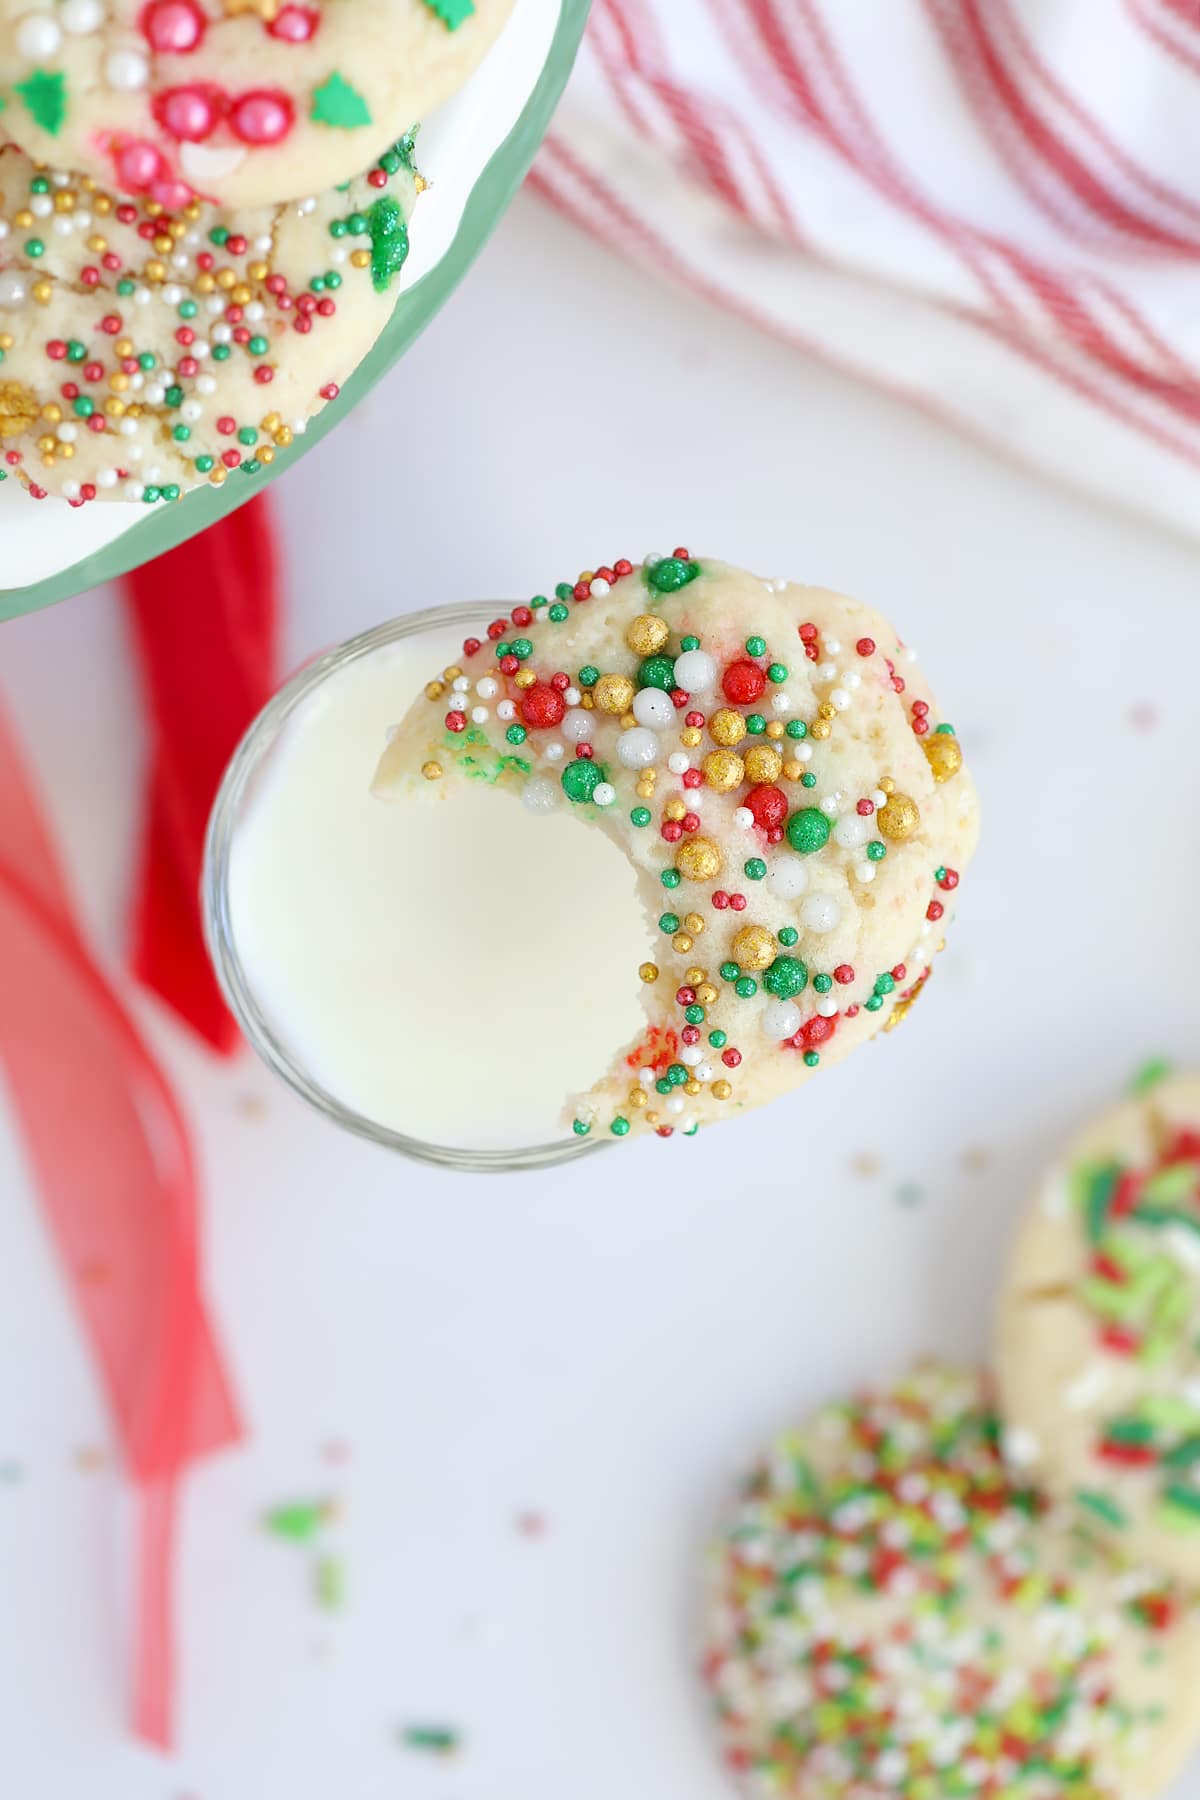 A Christmas sugar cookie with a bite taken out resting on the rim of a glass of milk.